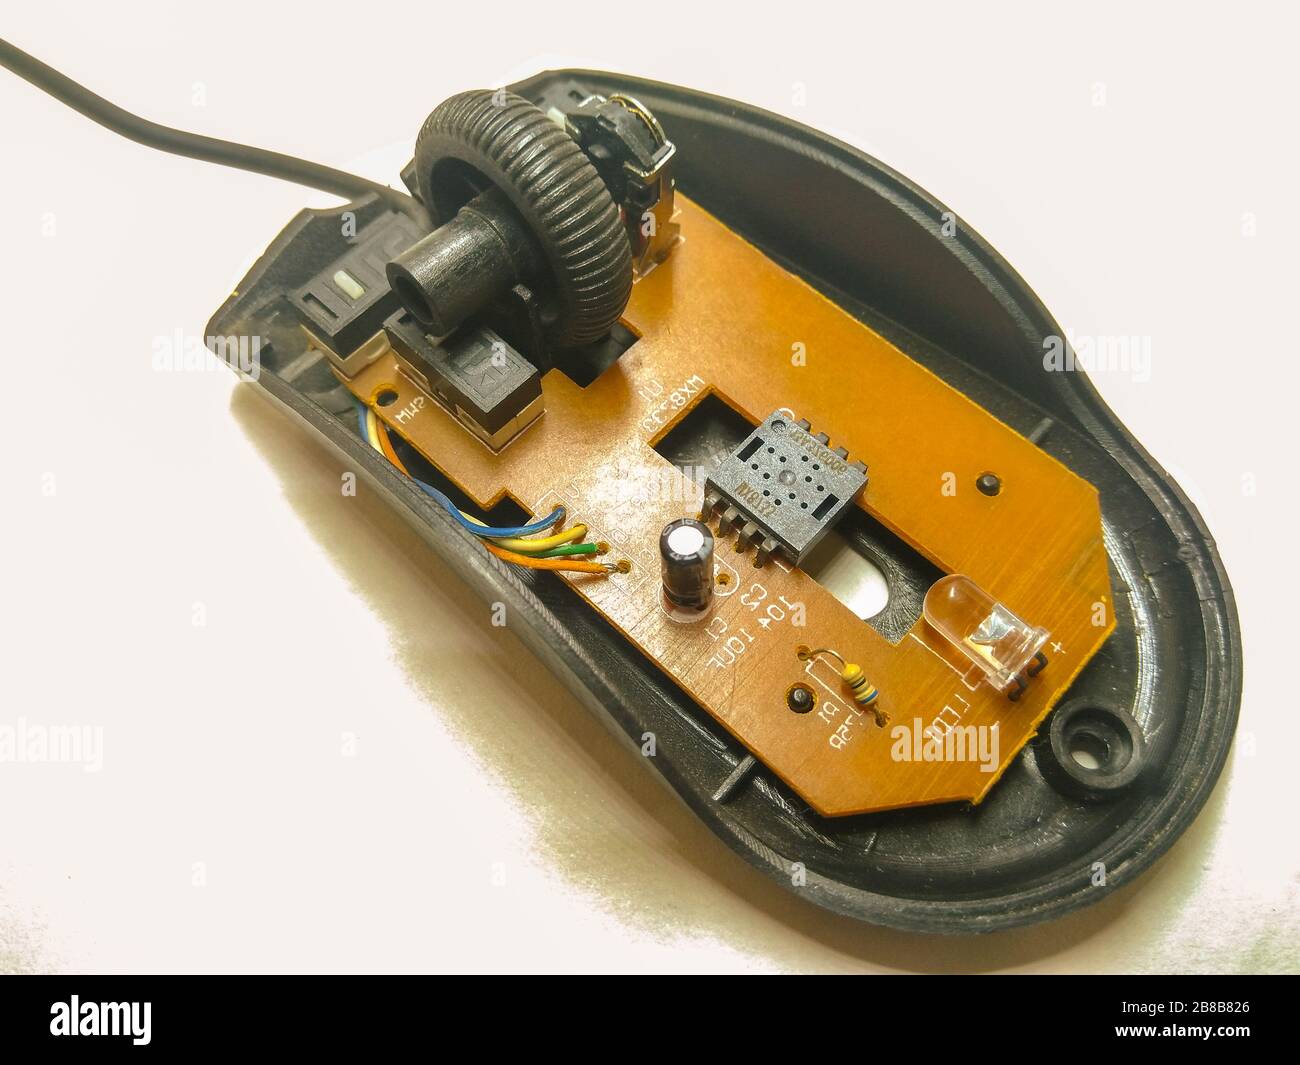 A picture of broken computer mouse Stock Photo - Alamy